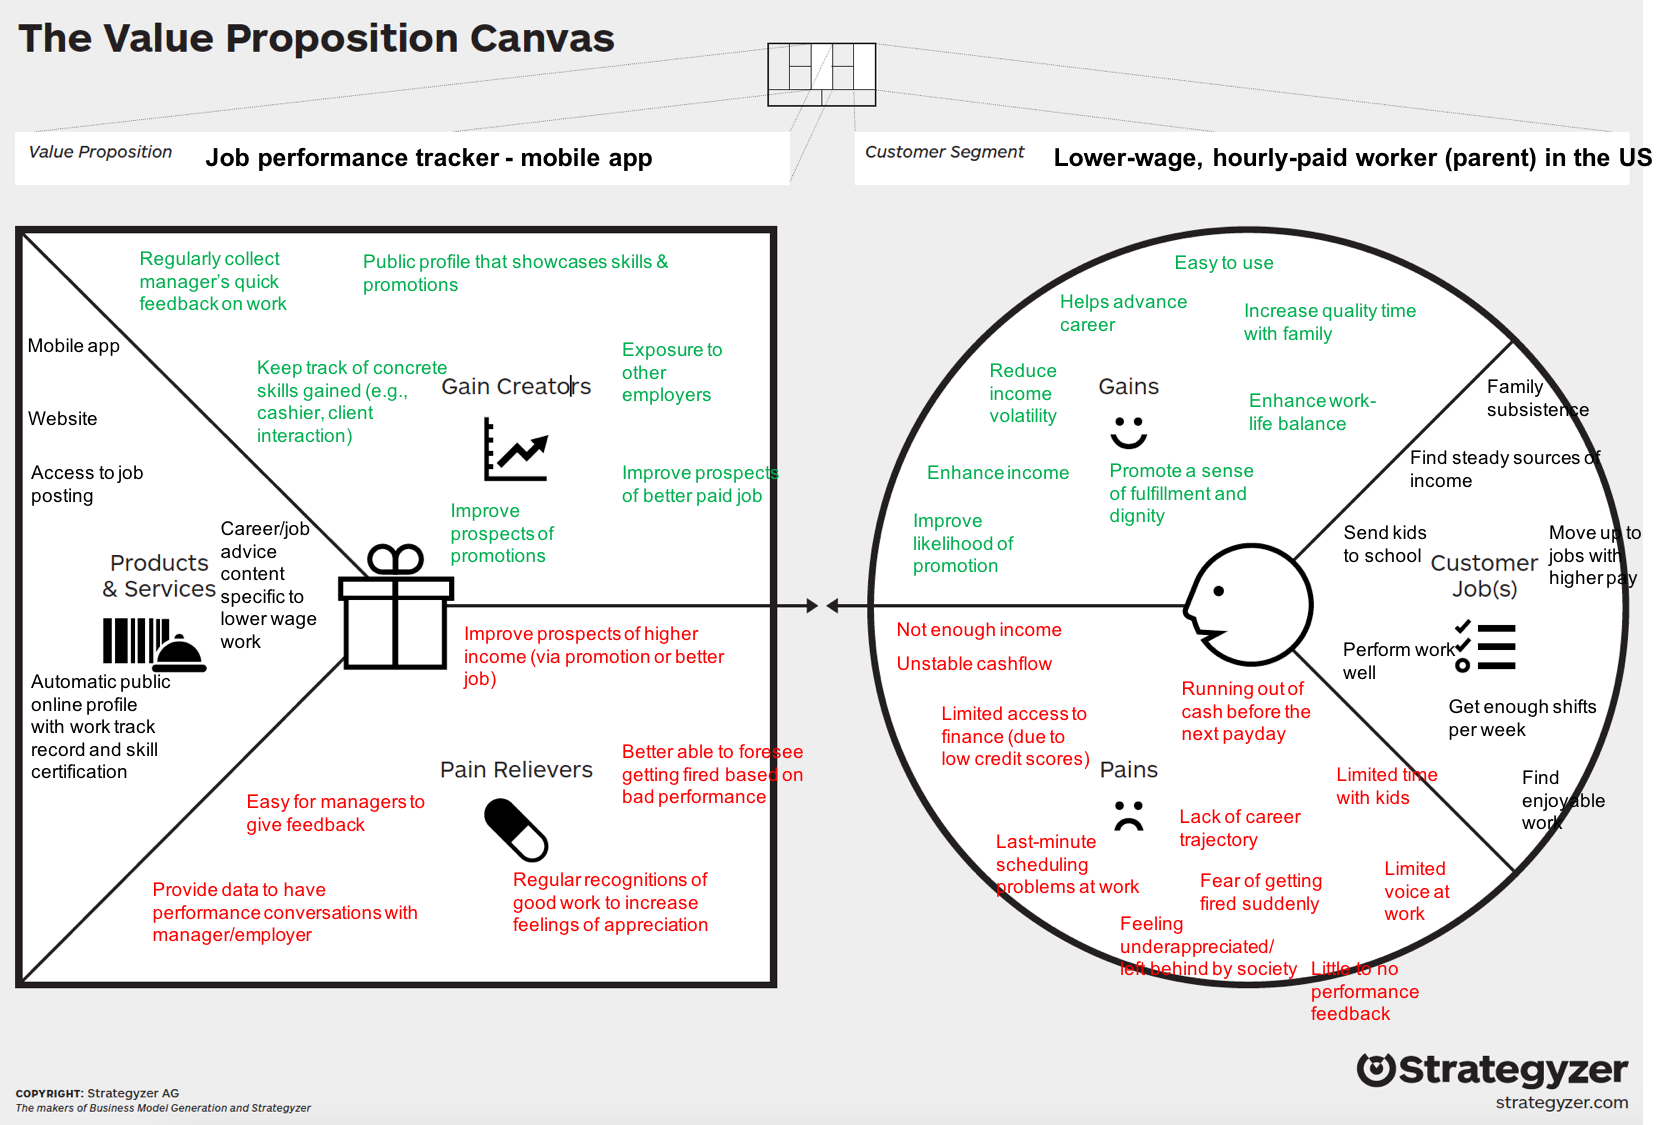 An example of a completed Value Proposition Canvas based on a fictional mobile application